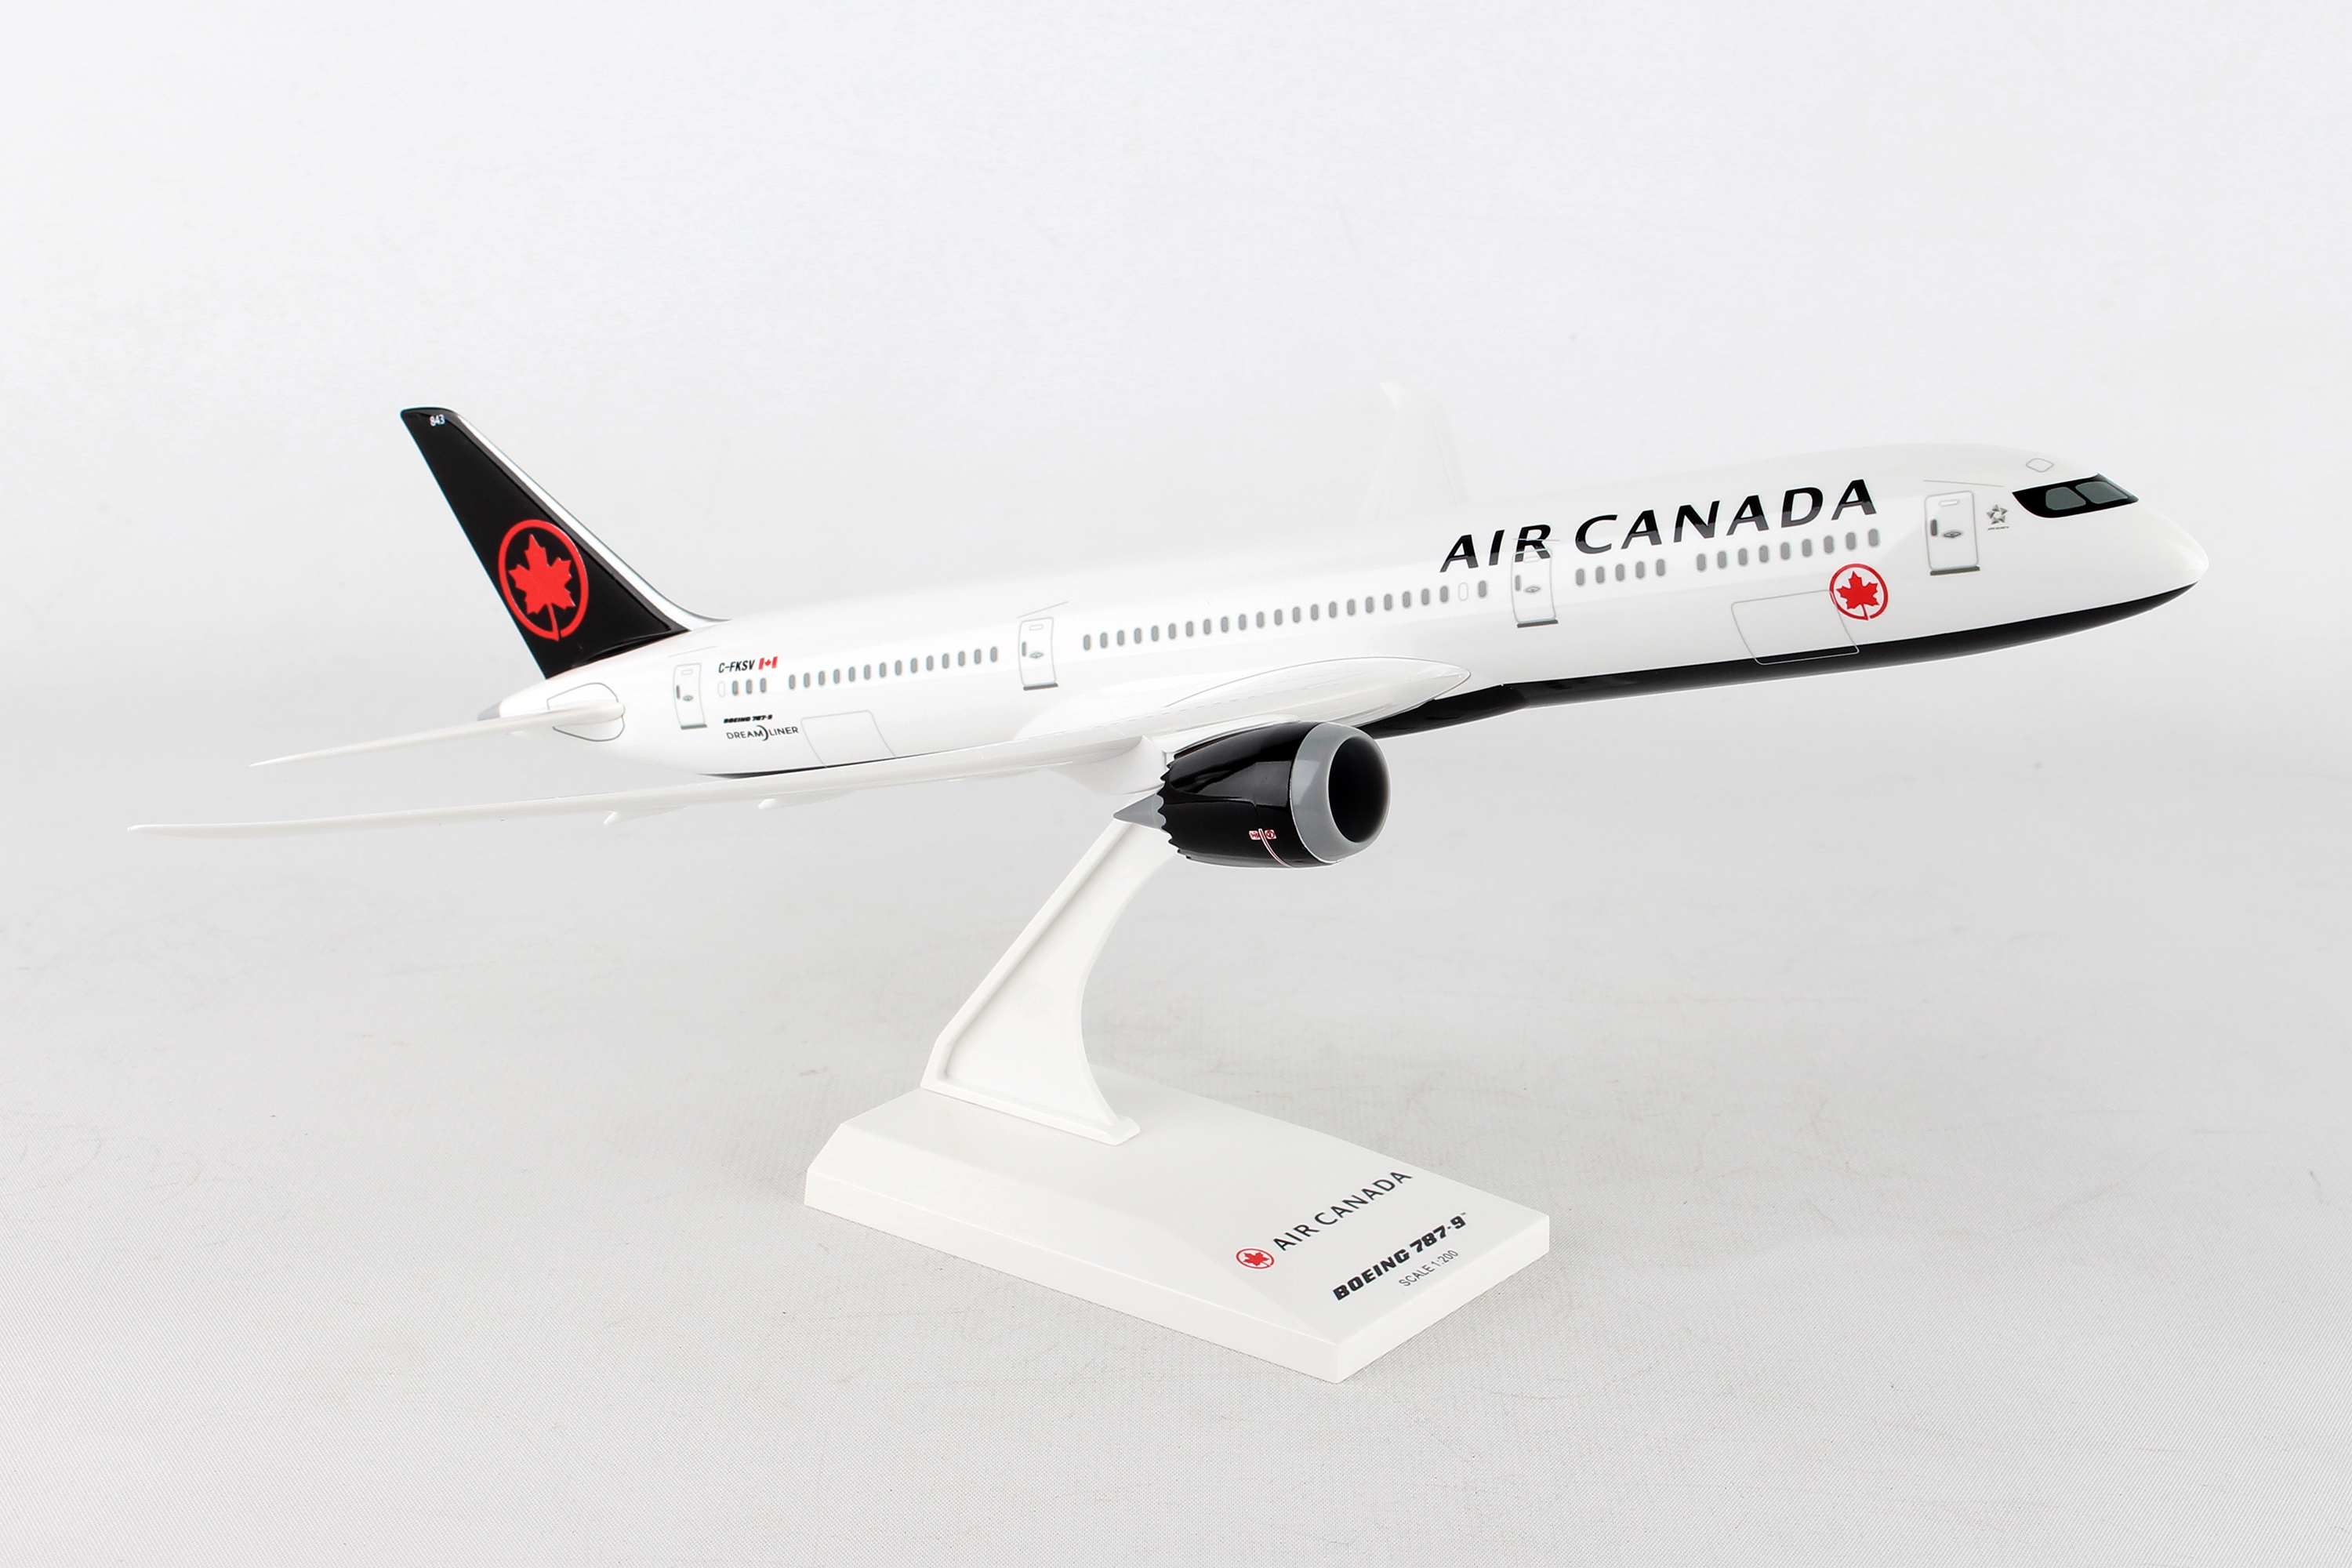 SkyMarks Flugzeugmodell Air Canada - Boeing 787-9 New Livery (1:200)